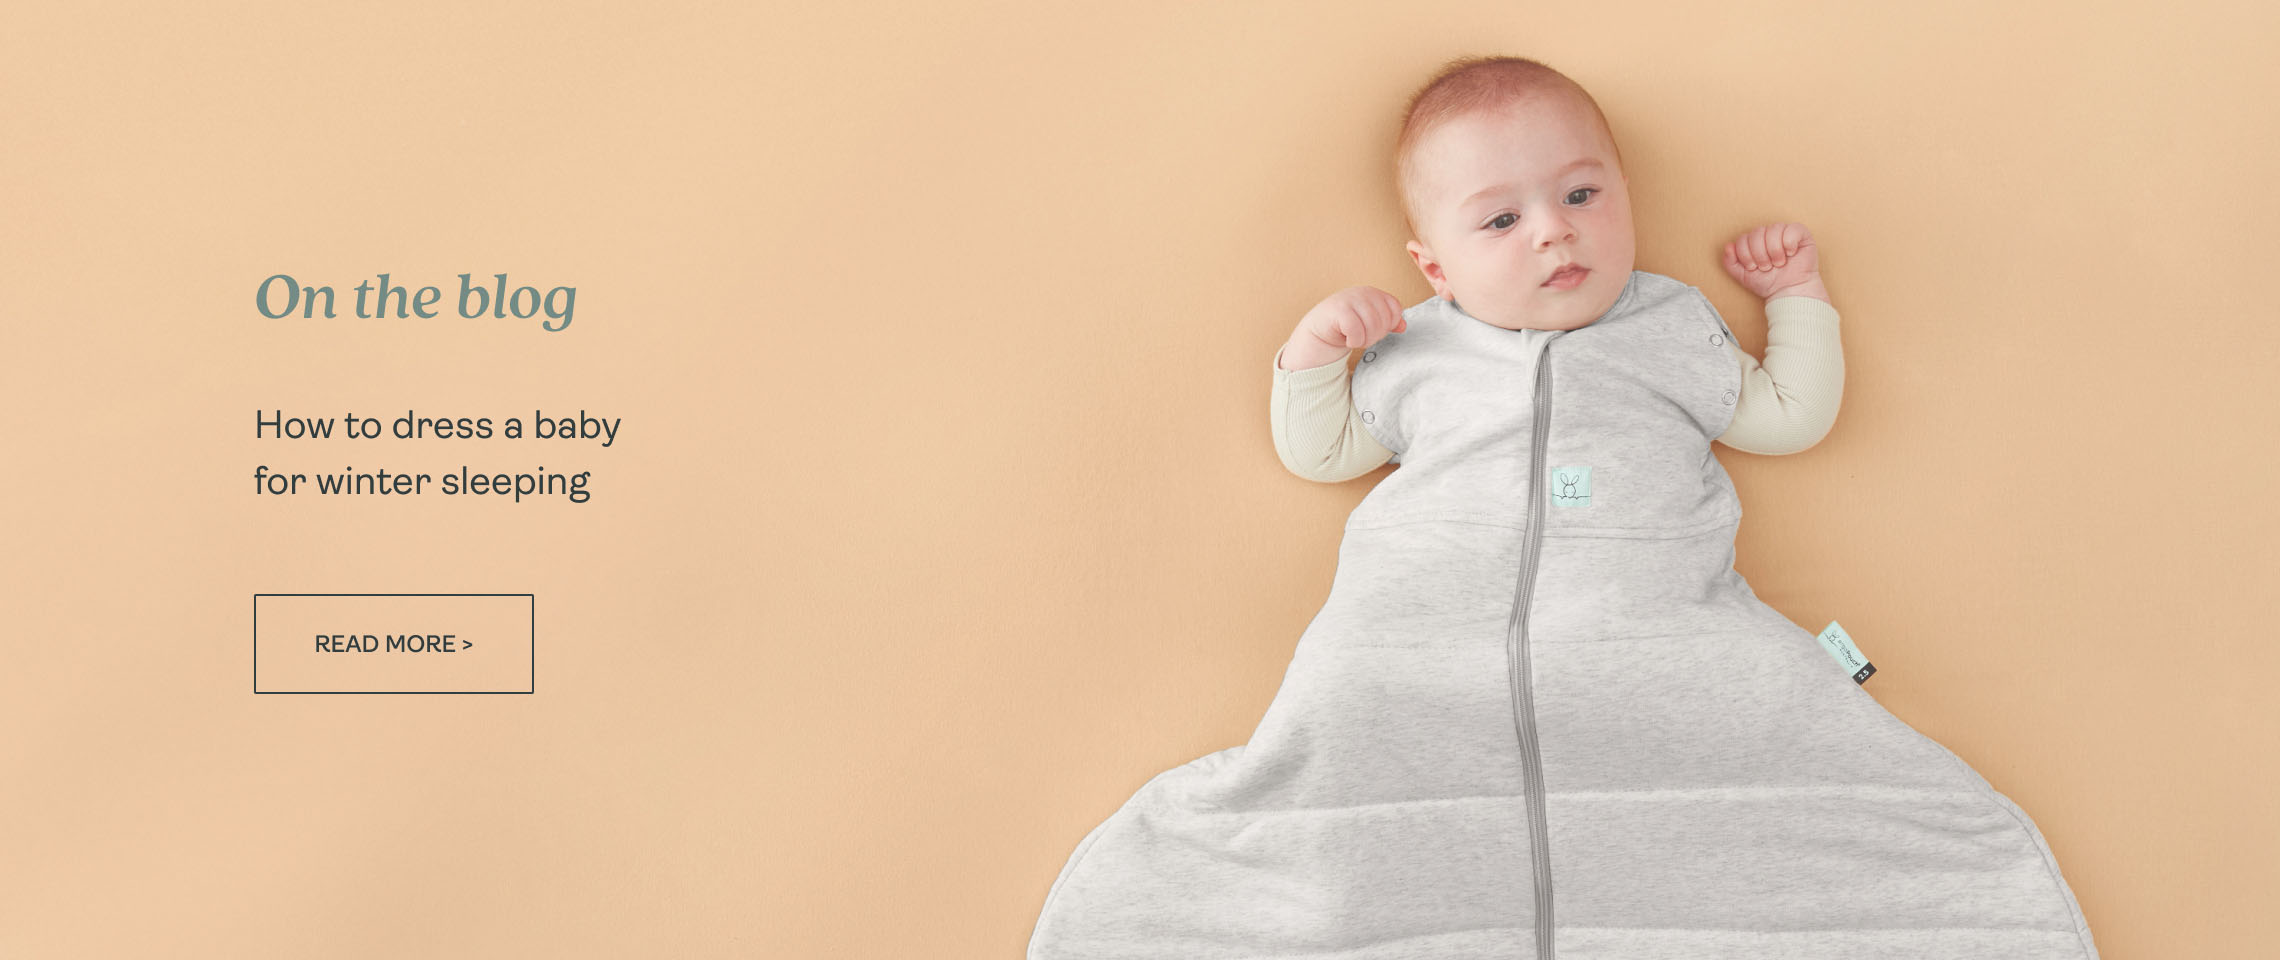 How to dress a baby for winter sleeping